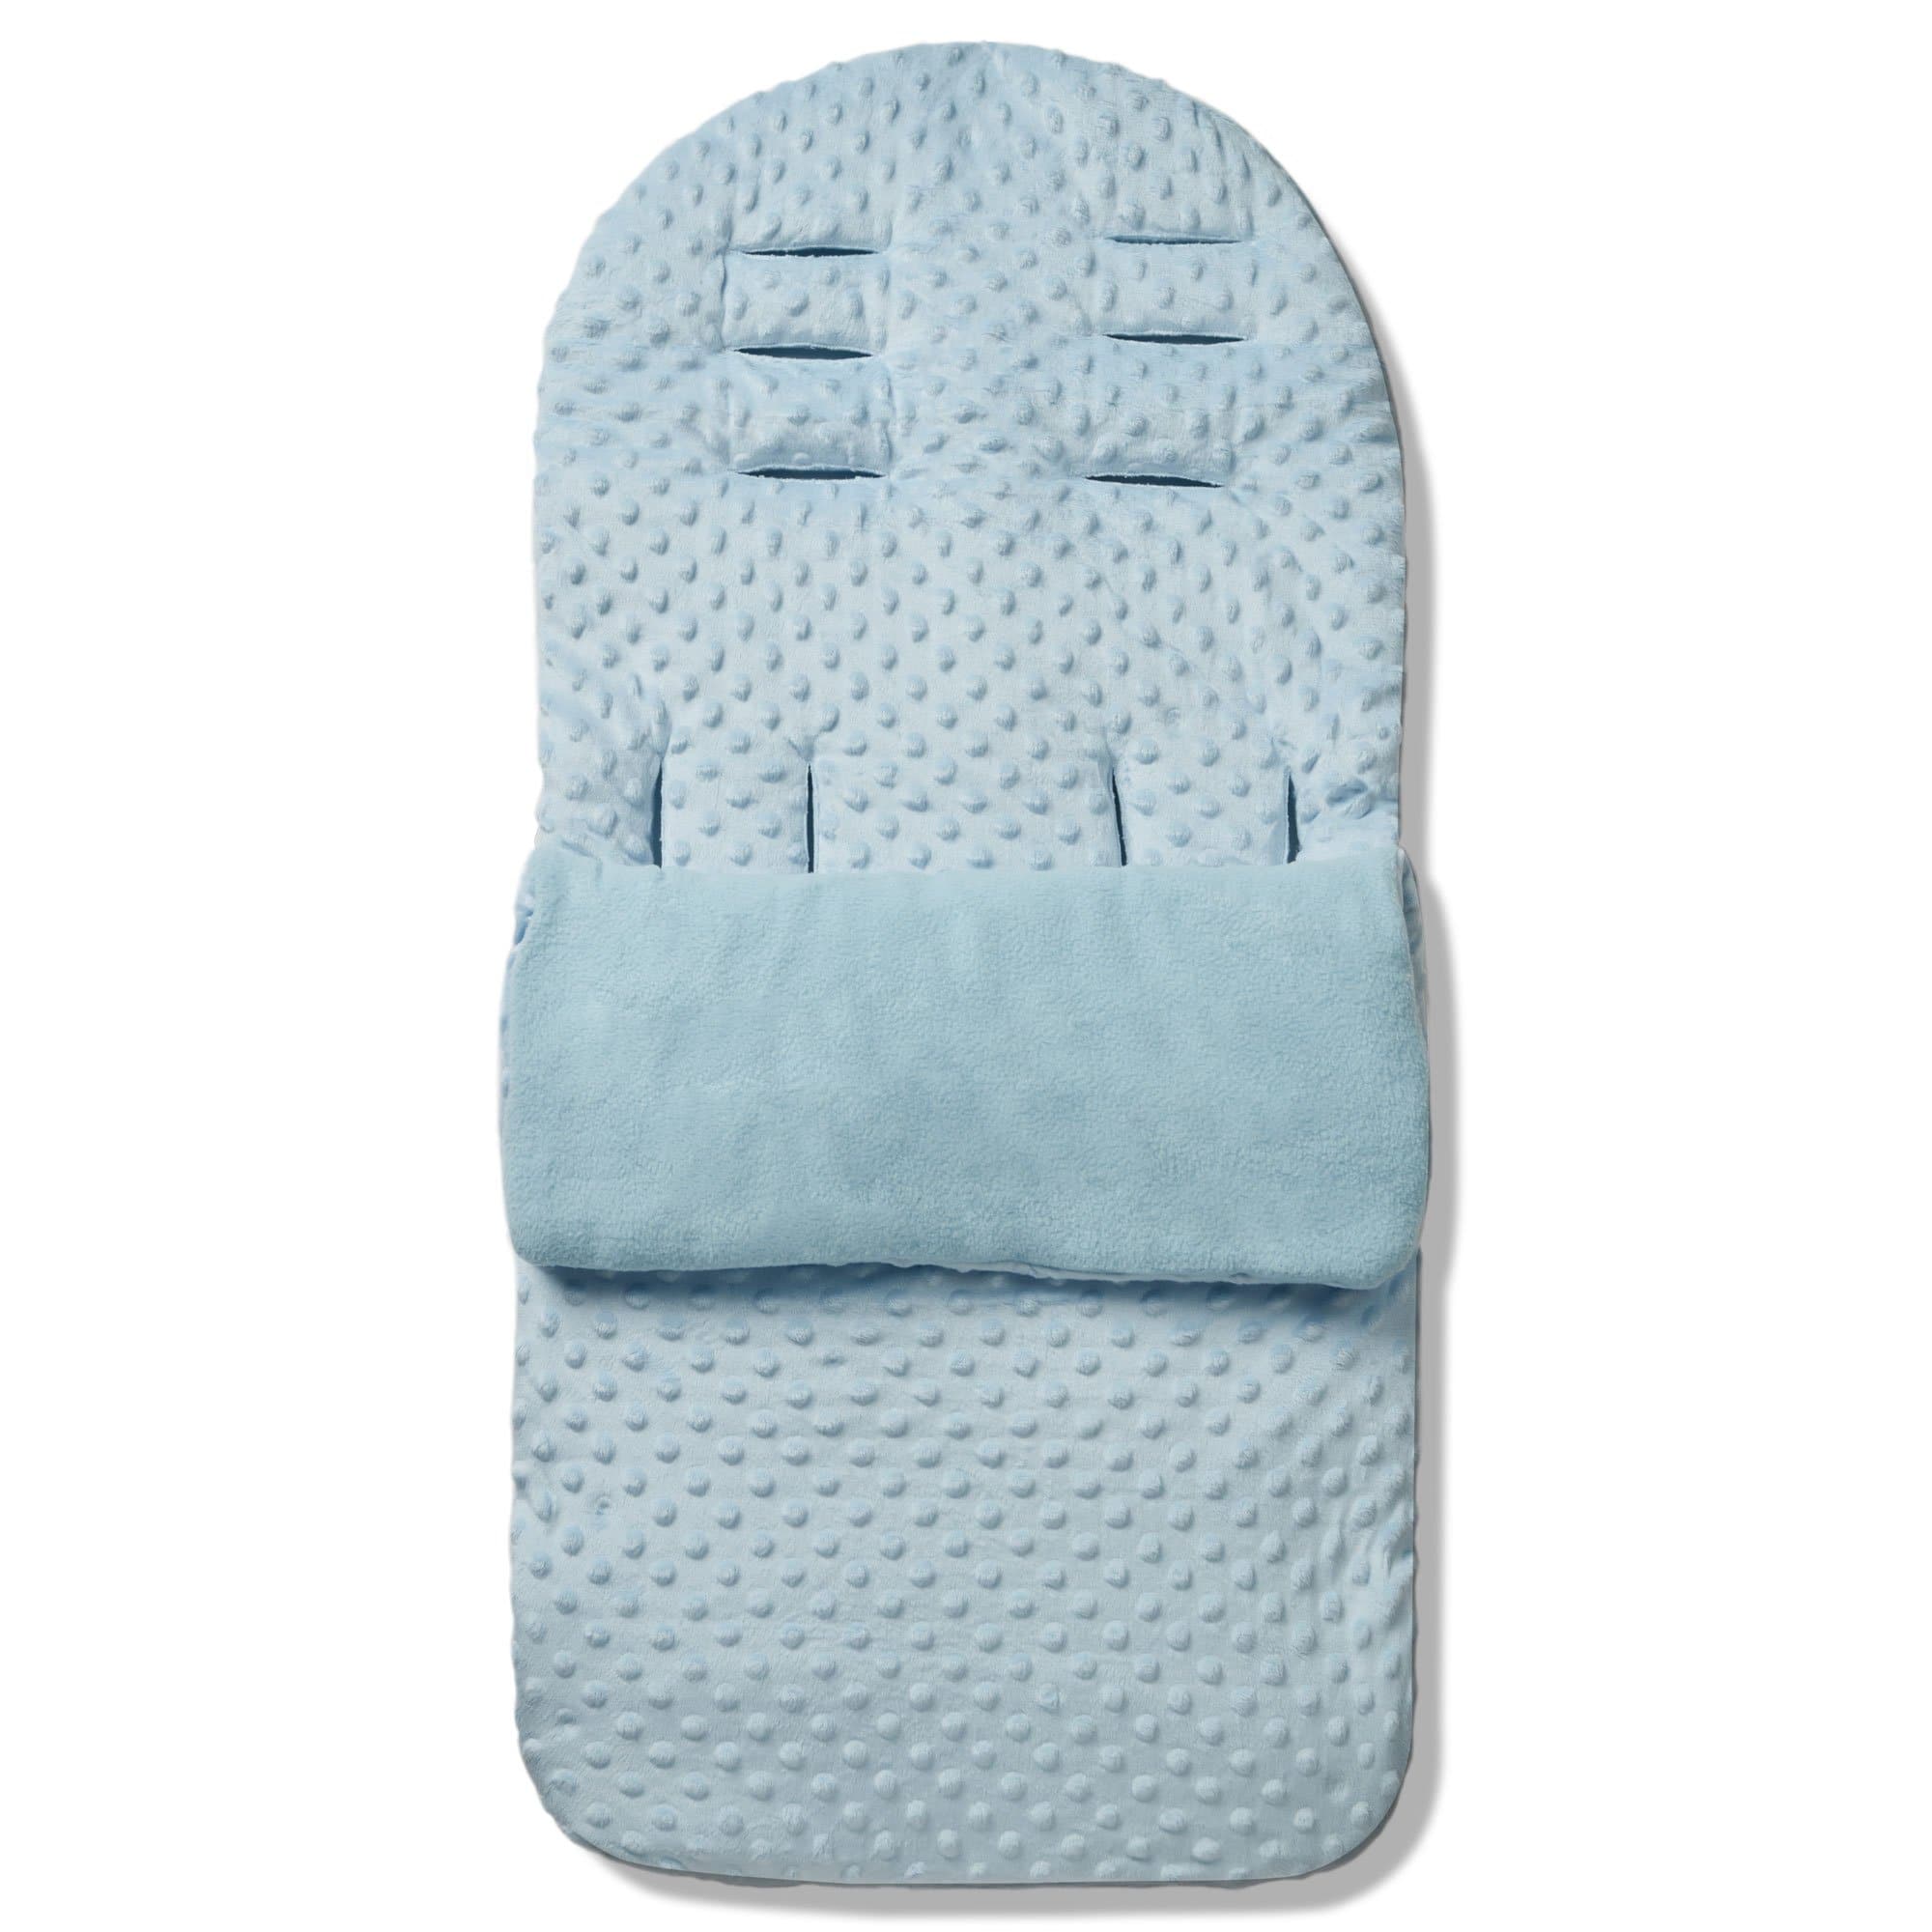 Dimple Footmuff / Cosy Toes Compatible with Excel - Blue / Fits All Models | For Your Little One